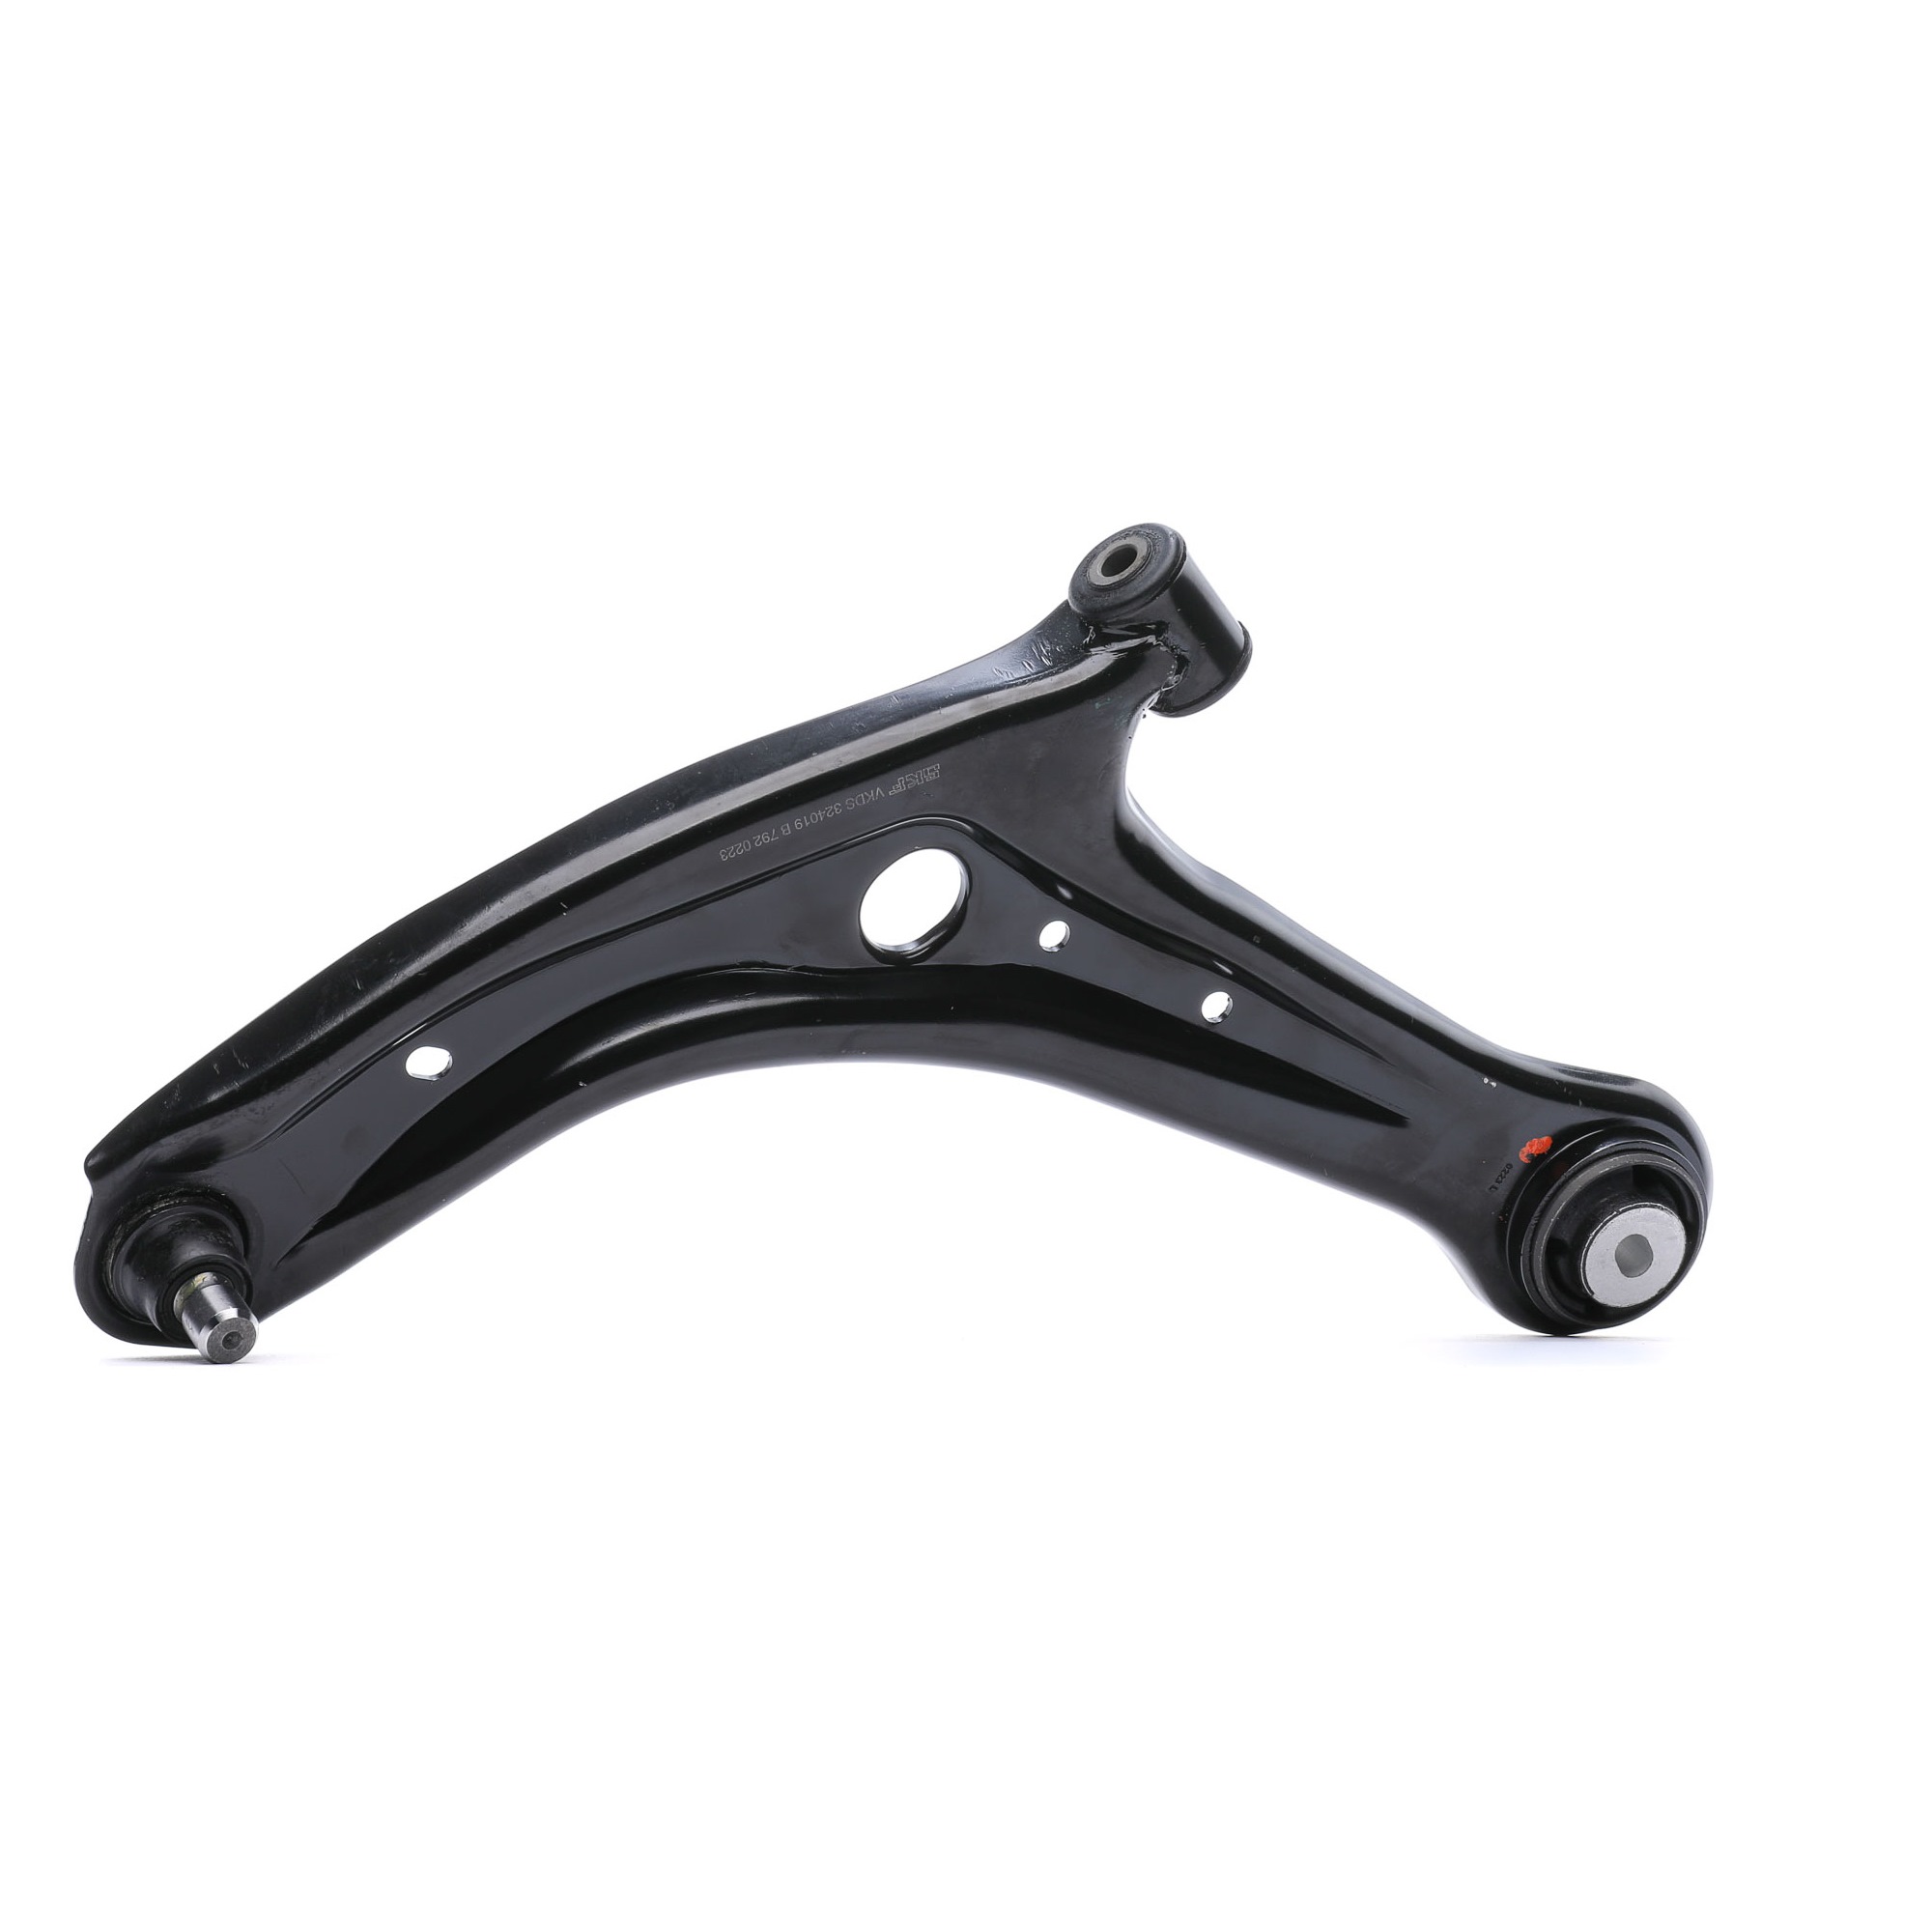 Ford Suspension arm SKF VKDS 324019 B at a good price